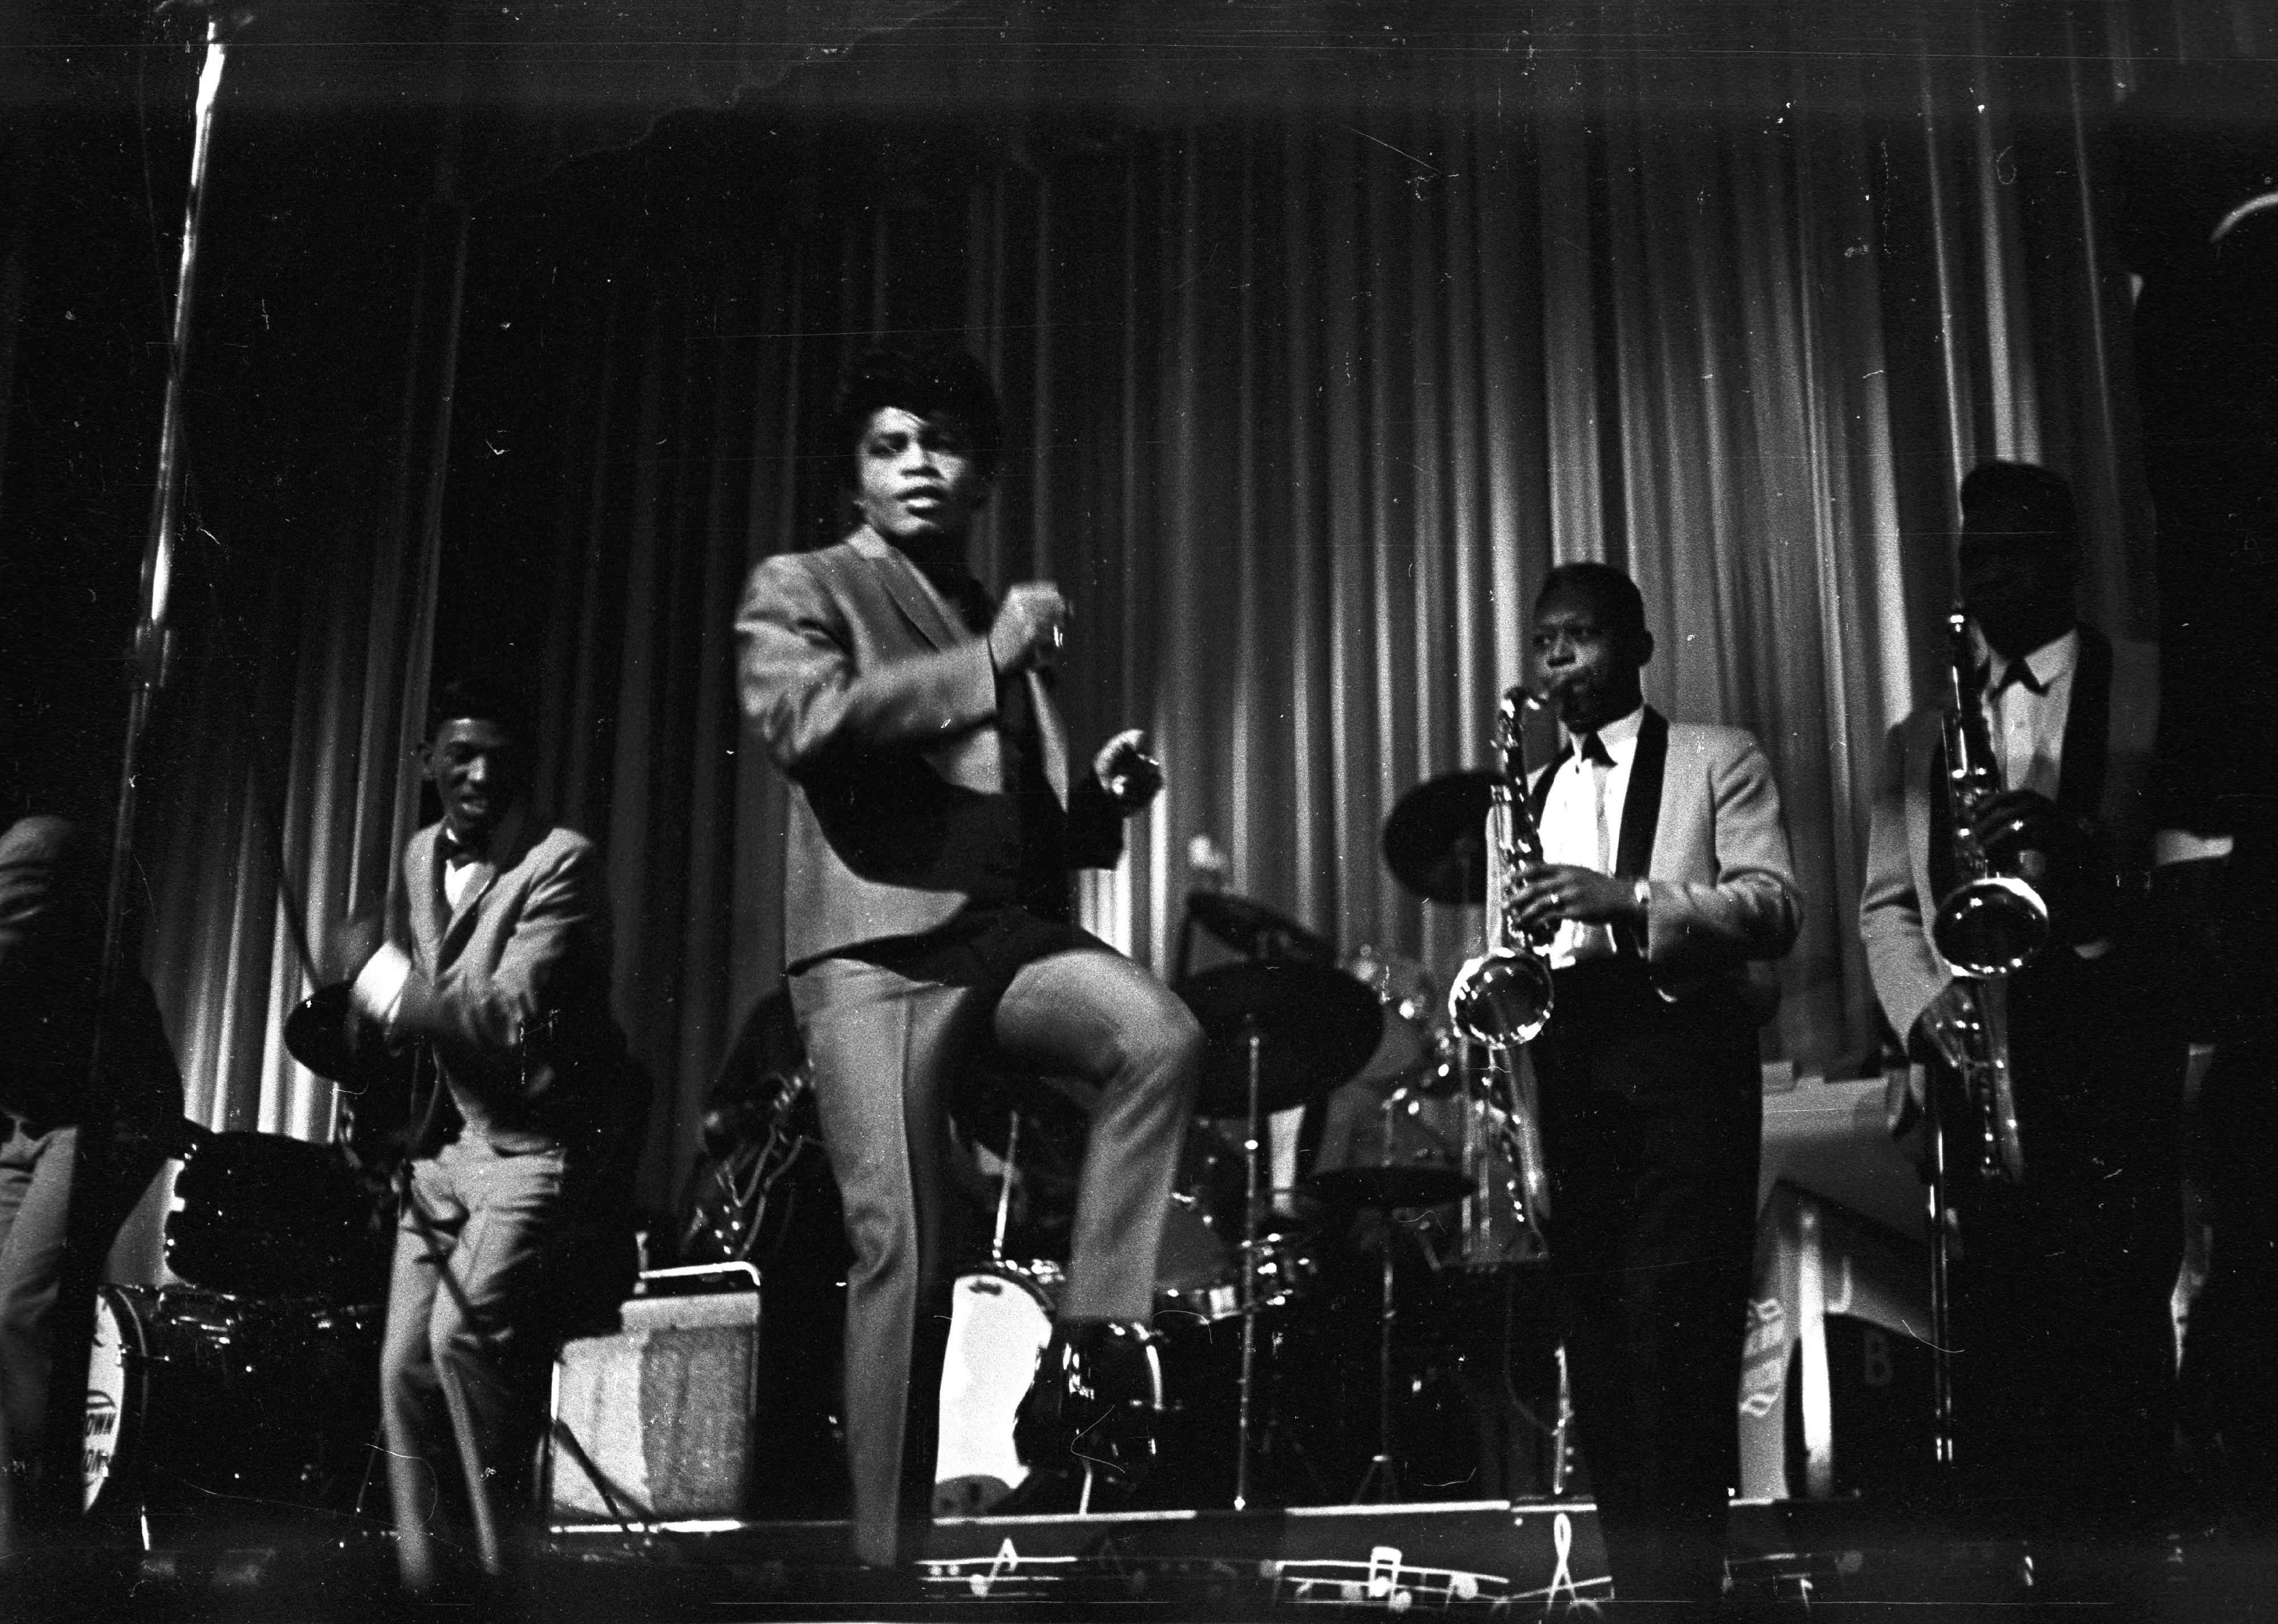 James Brown performs onstage at the Apollo Theatre.